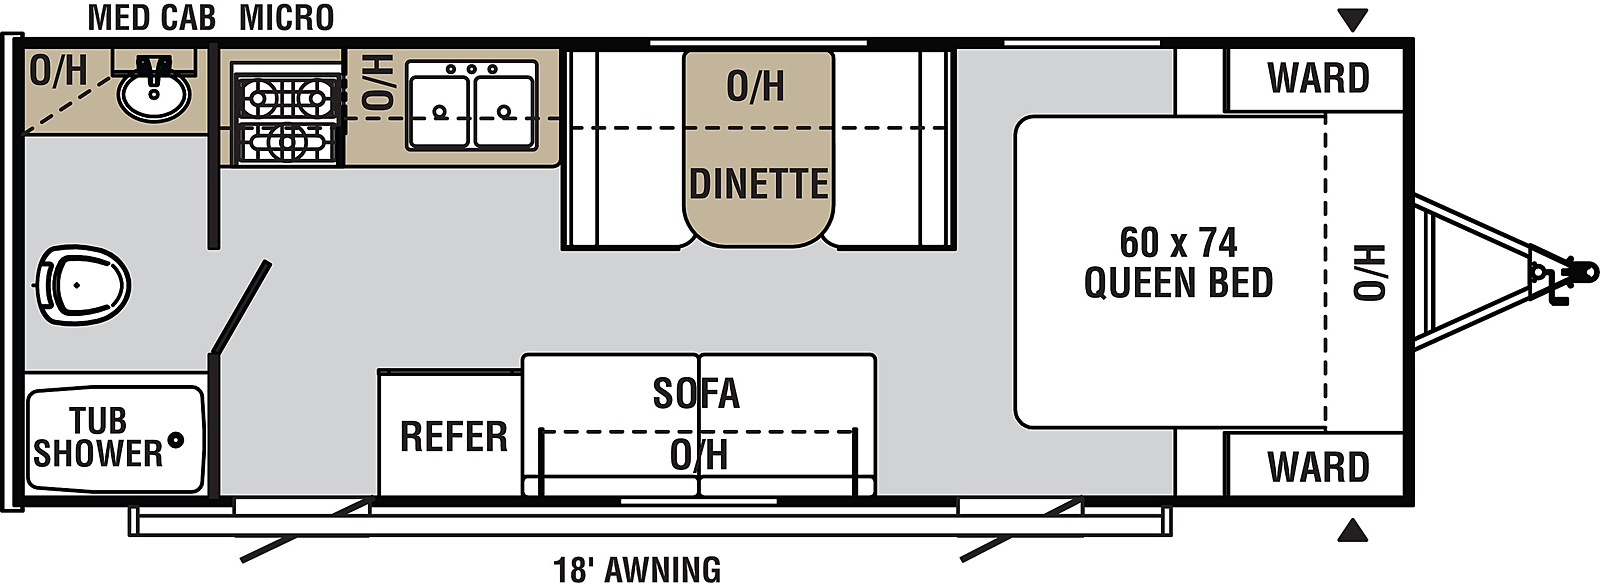 Viking Ultra-Lite 21SFQ floorplan. The 21SFQ has no slide outs and two plus entry doors.